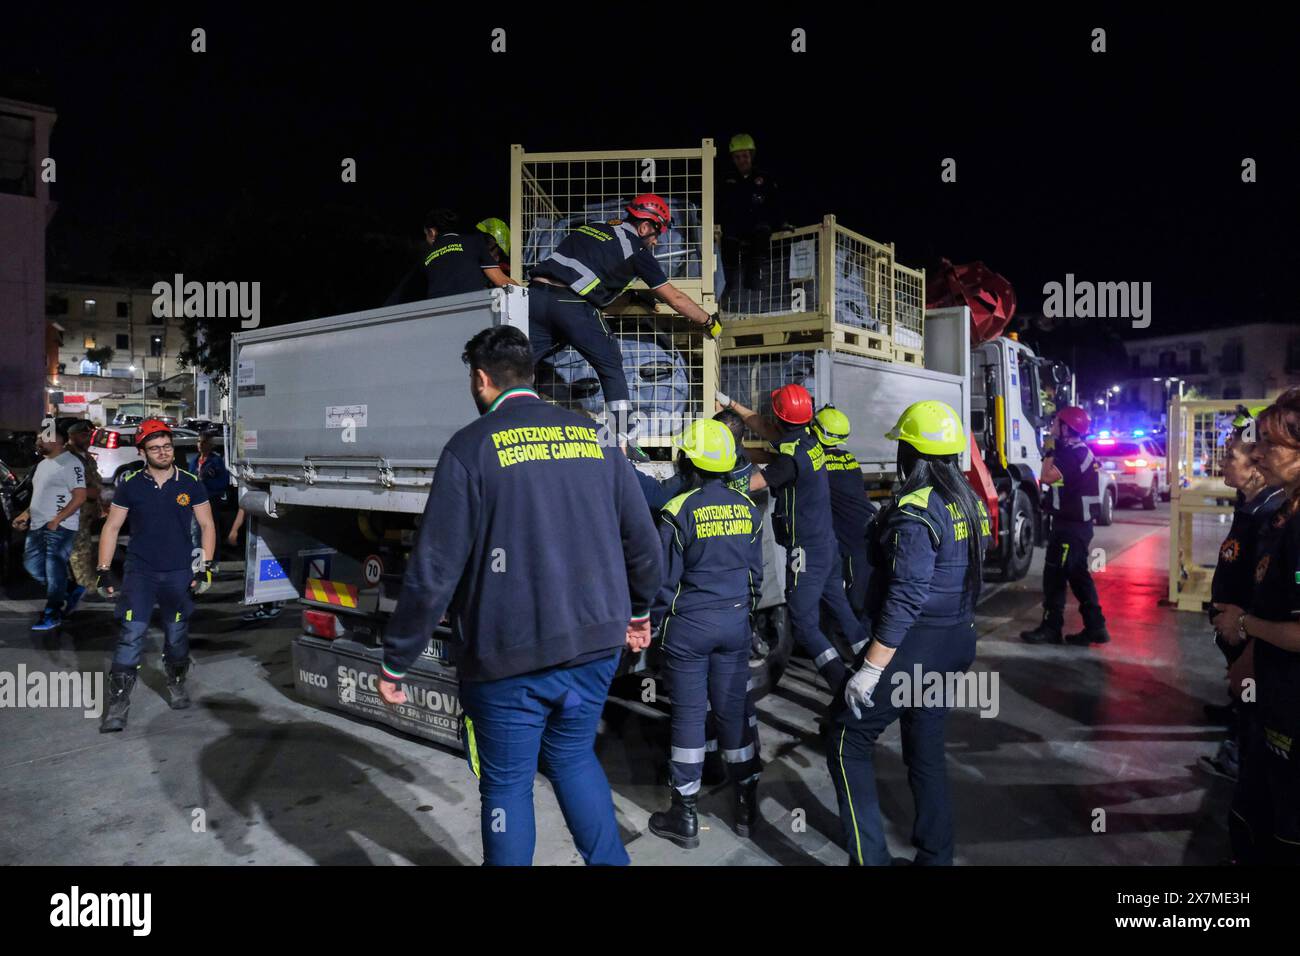 News - Italy: Campi Flegrei, bradisismo Campania s civil protection set up a tensile structure at the port of pozzuoli for people who are not confident about returning to their homes after the earthquake tremors, near Naples, southern Italy, 20 May 2024. The tremor that occurred at 8.10pm with epicentre in the Campi Flegrei was of magnitude 4.4. This was reported by the National Institute of Geophysics and Volcanology, according to which the depth of the quake was three kilometres. Napoli Pozzuoli Italy Copyright: xAntonioxBalascox/xLiveMediax LPN 1364595 Stock Photo